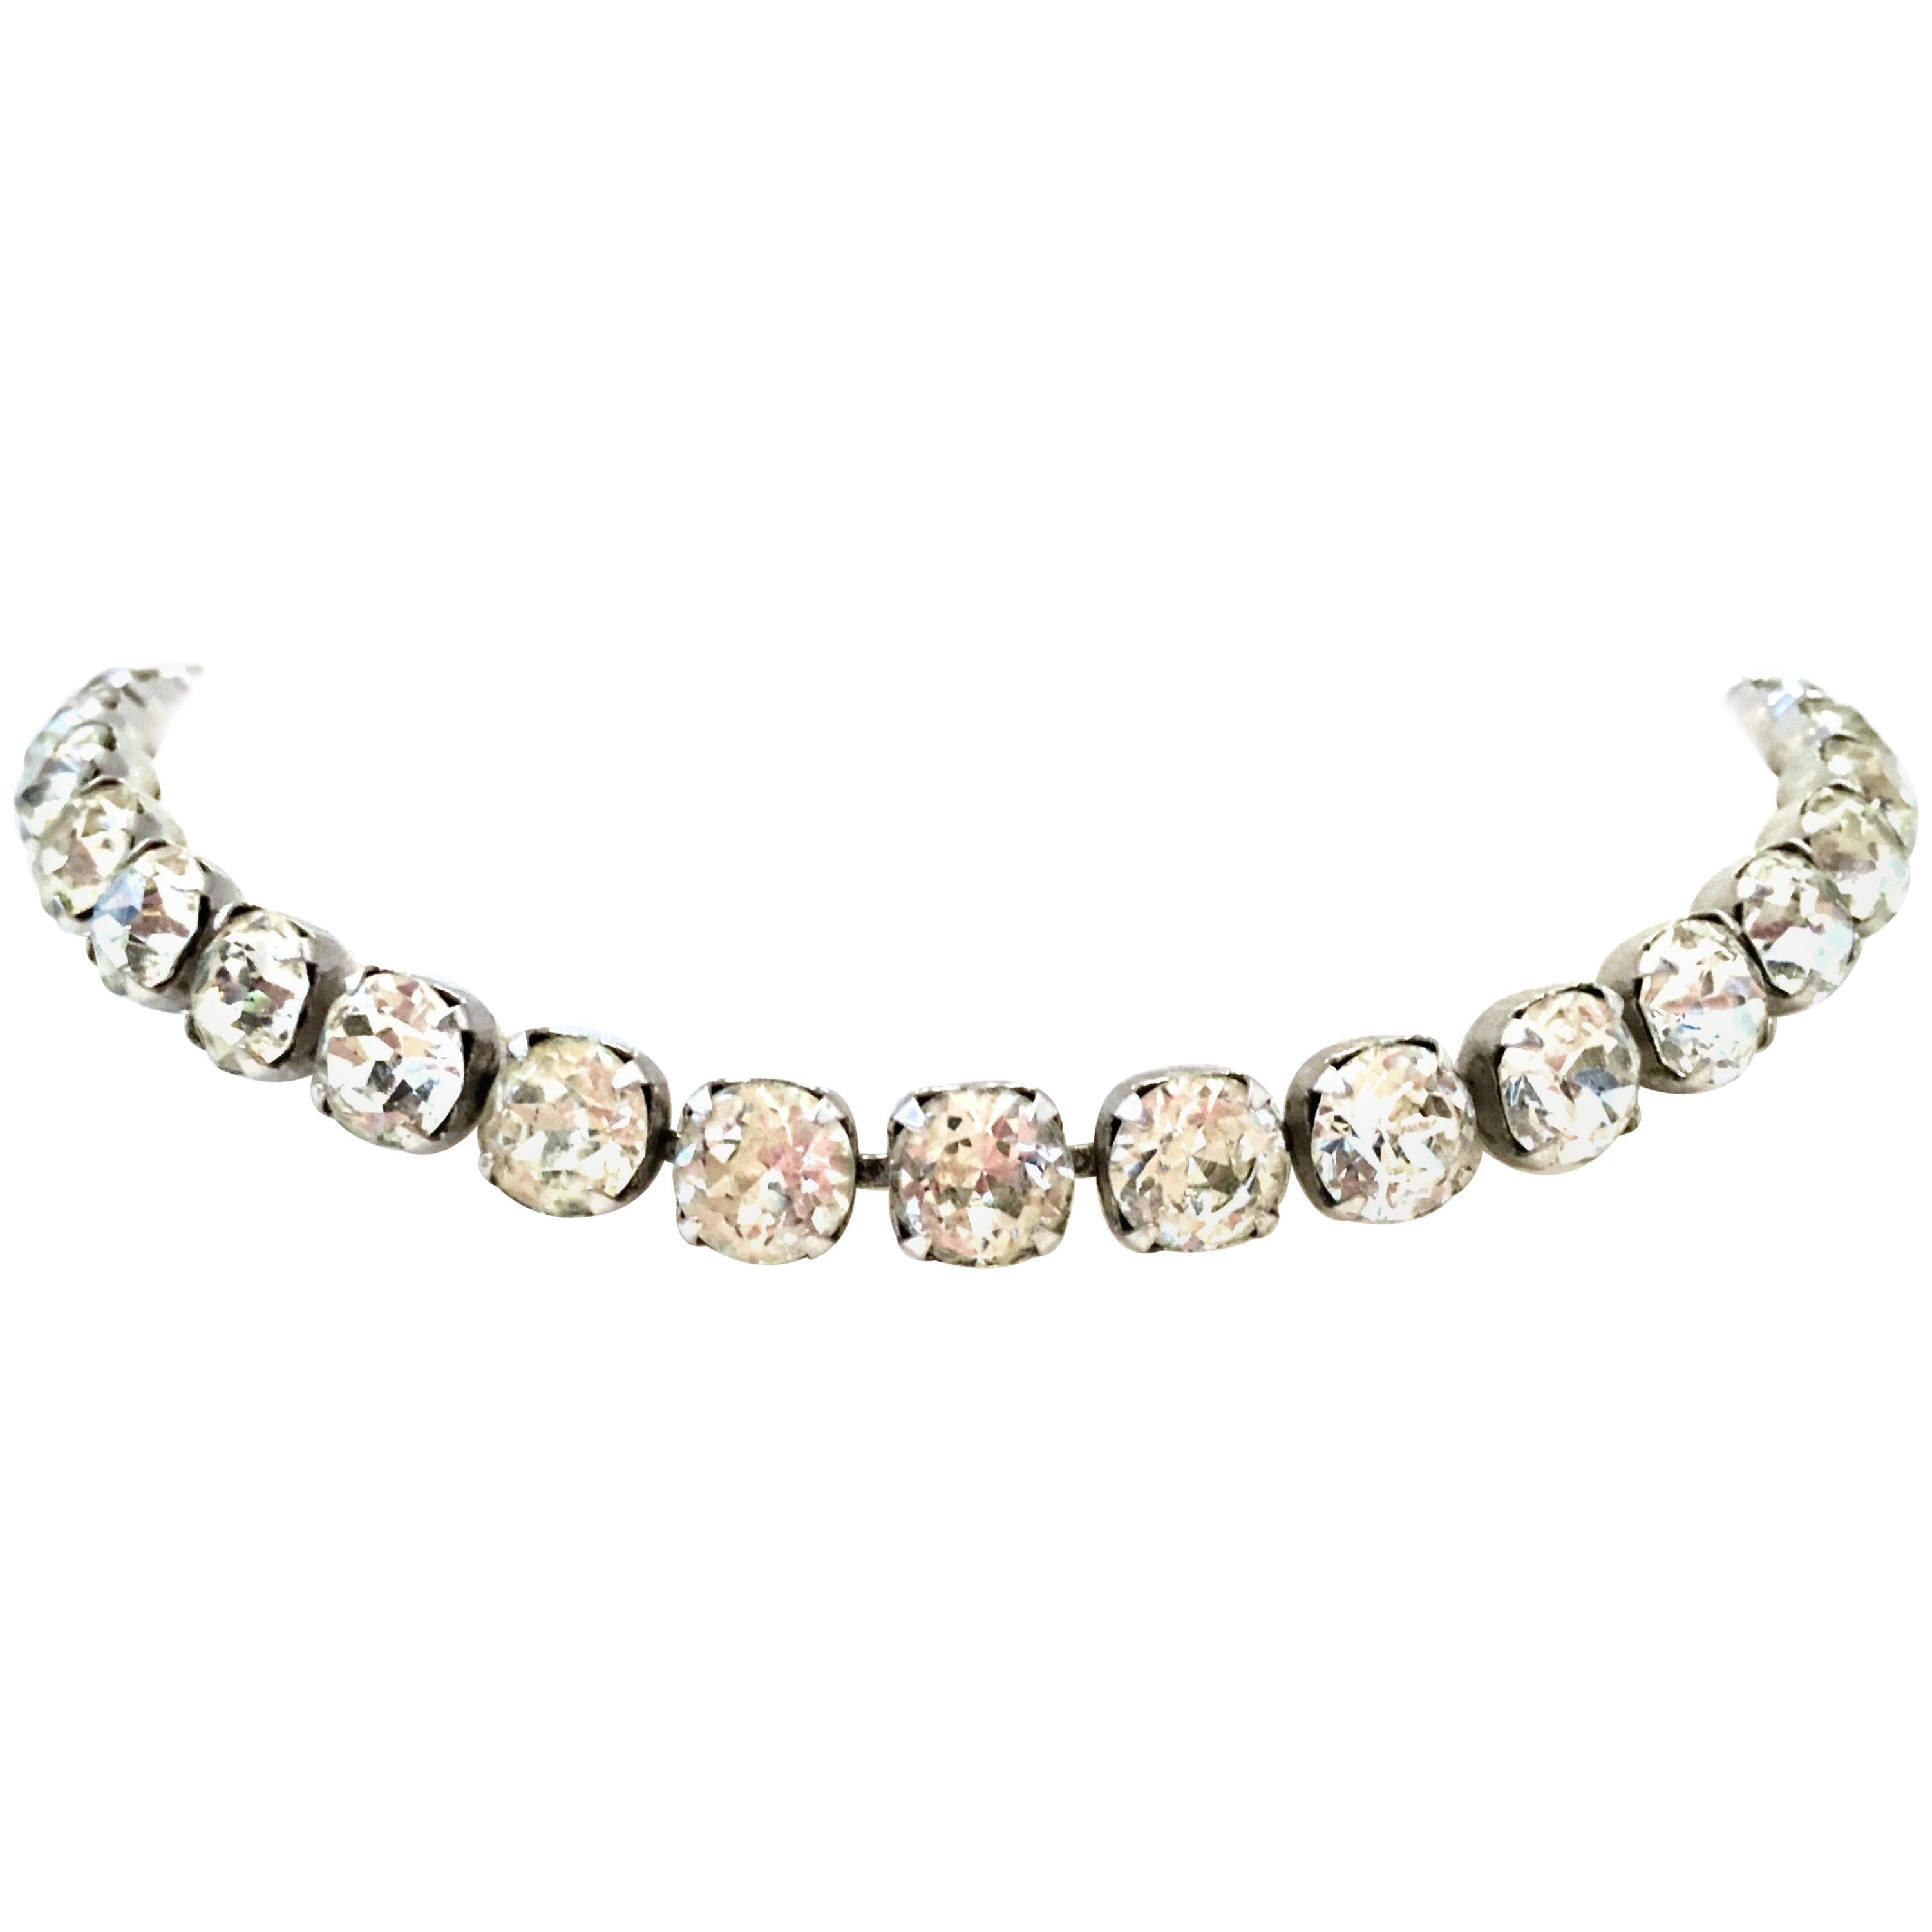 Mid-20th Century Silver & Austrian Crystal Choker Style Necklace